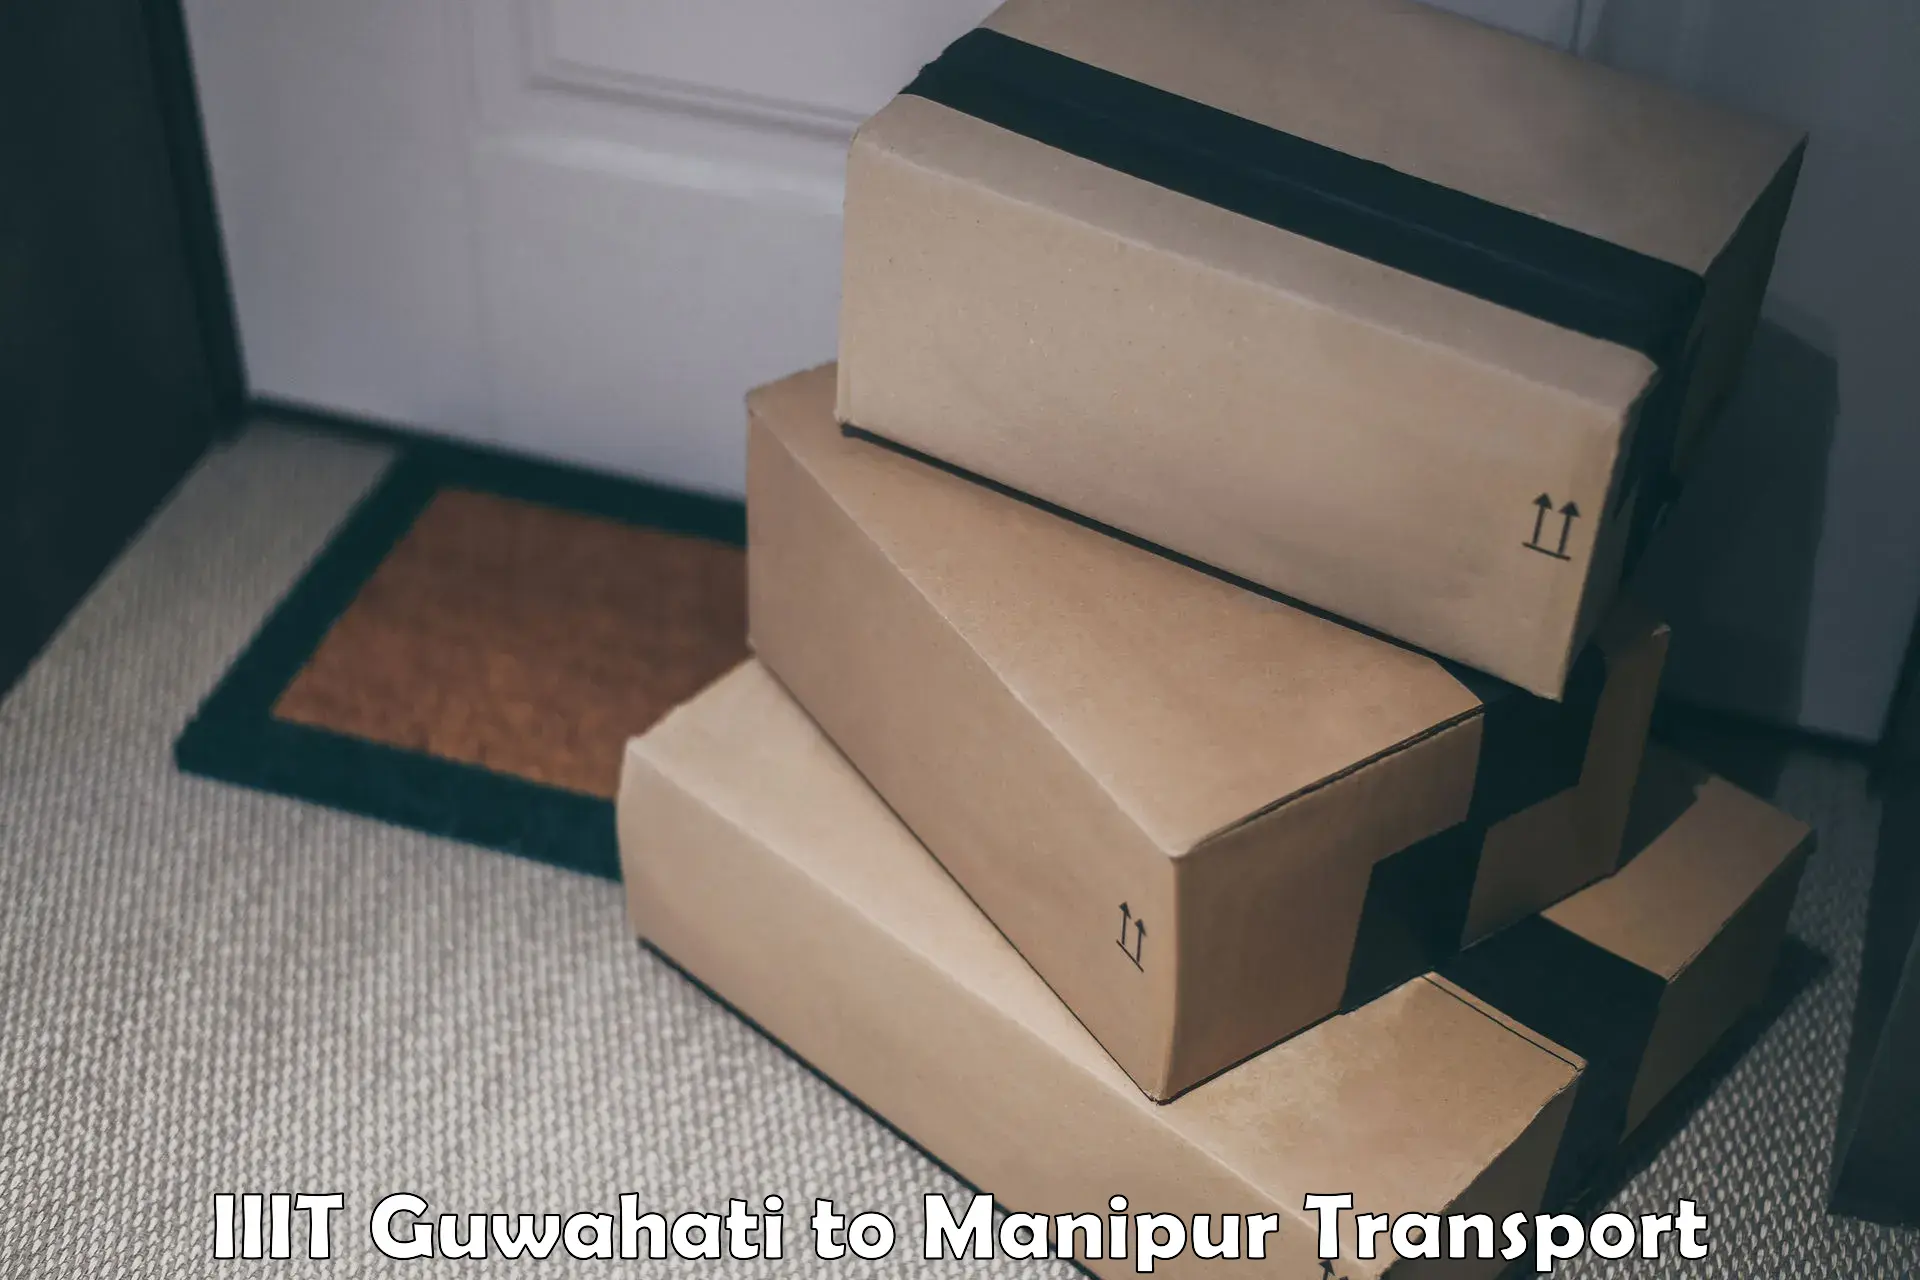 Container transport service IIIT Guwahati to Manipur